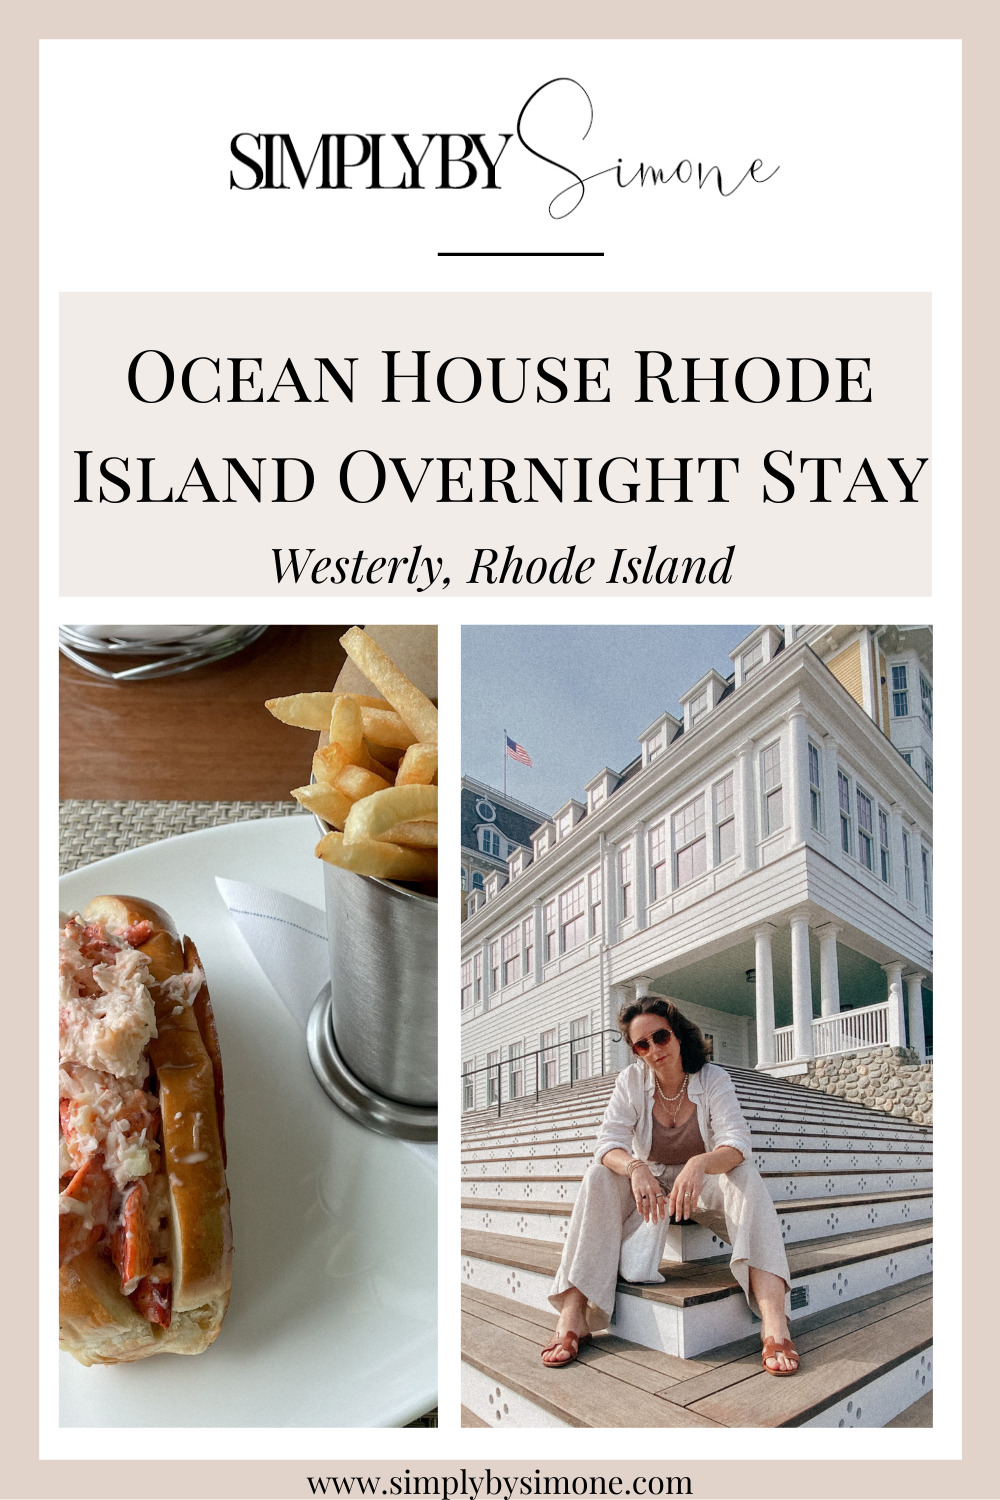 Sipping Terrace at Ocean House Rhode Island Overnight Stay